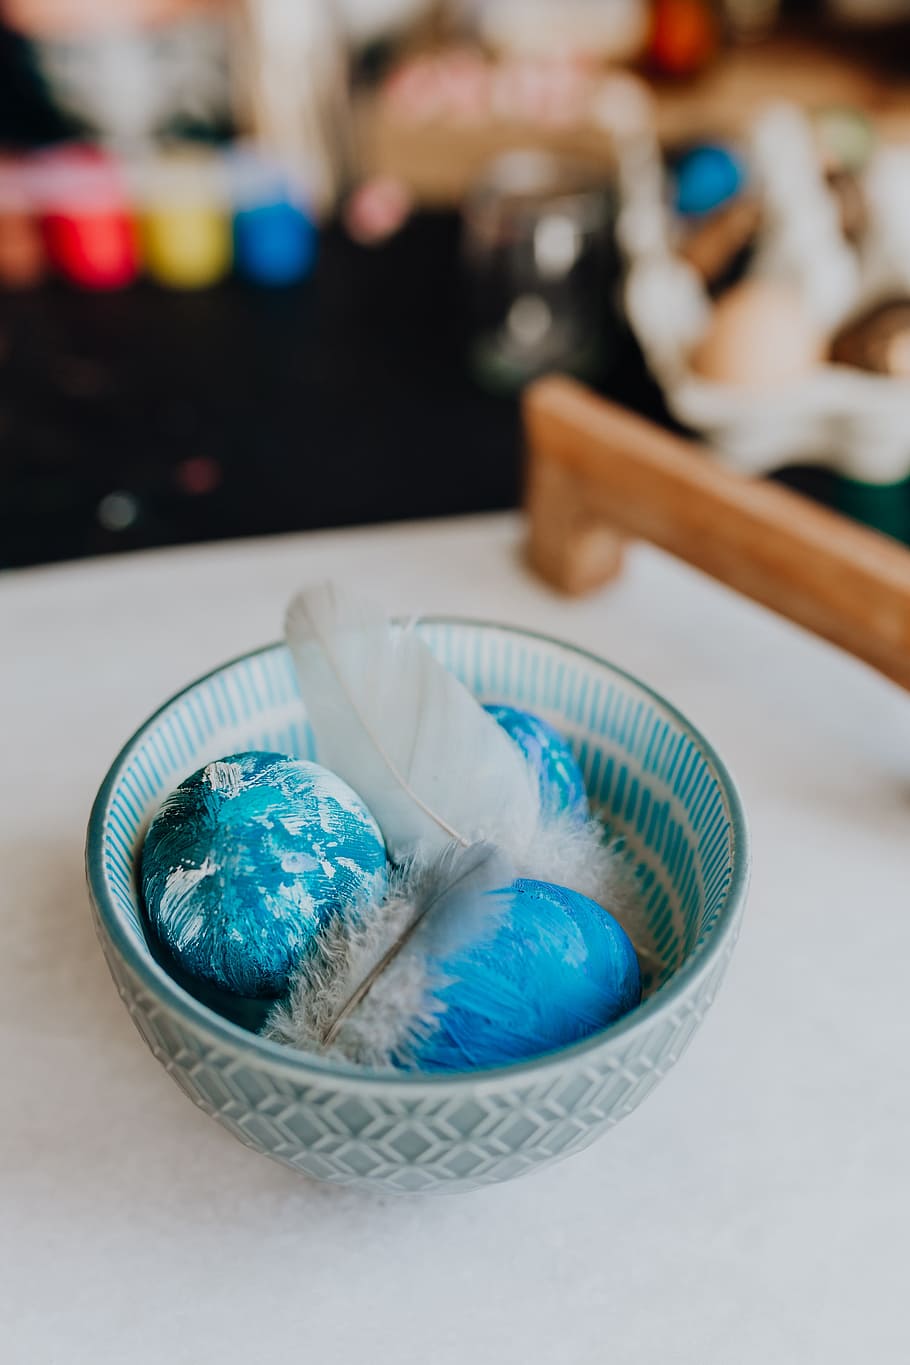 blue easter eggs, blue, eggs, colorful, easter, painted, focus on foreground, table, still life, close-up